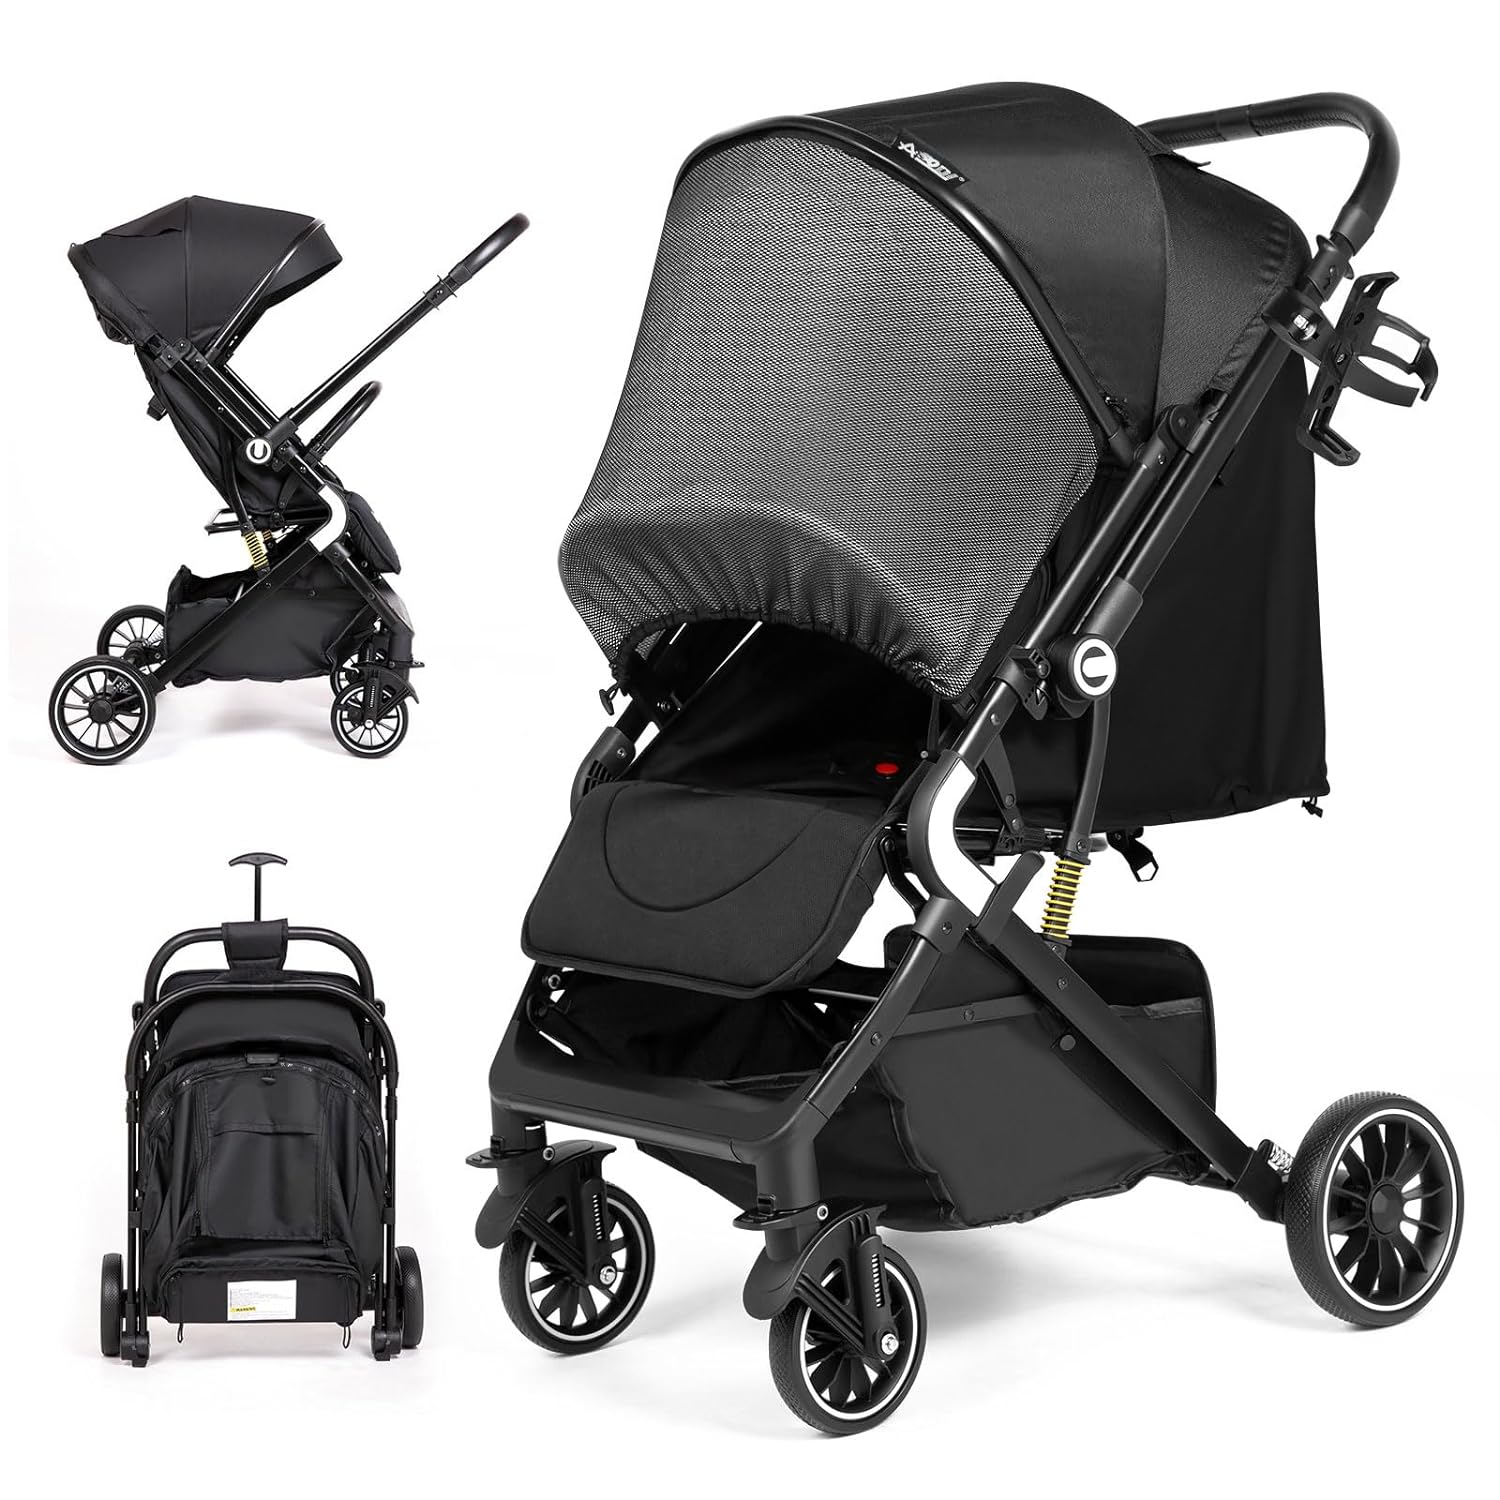 AODI Lightweight Reversible Baby Stroller, Infant Toddler Stroller, One Hand Easy Folding Compact Travel Stroller with Cup Holder  Oversize Basket, Sleep Shade for Airplane Travel and More